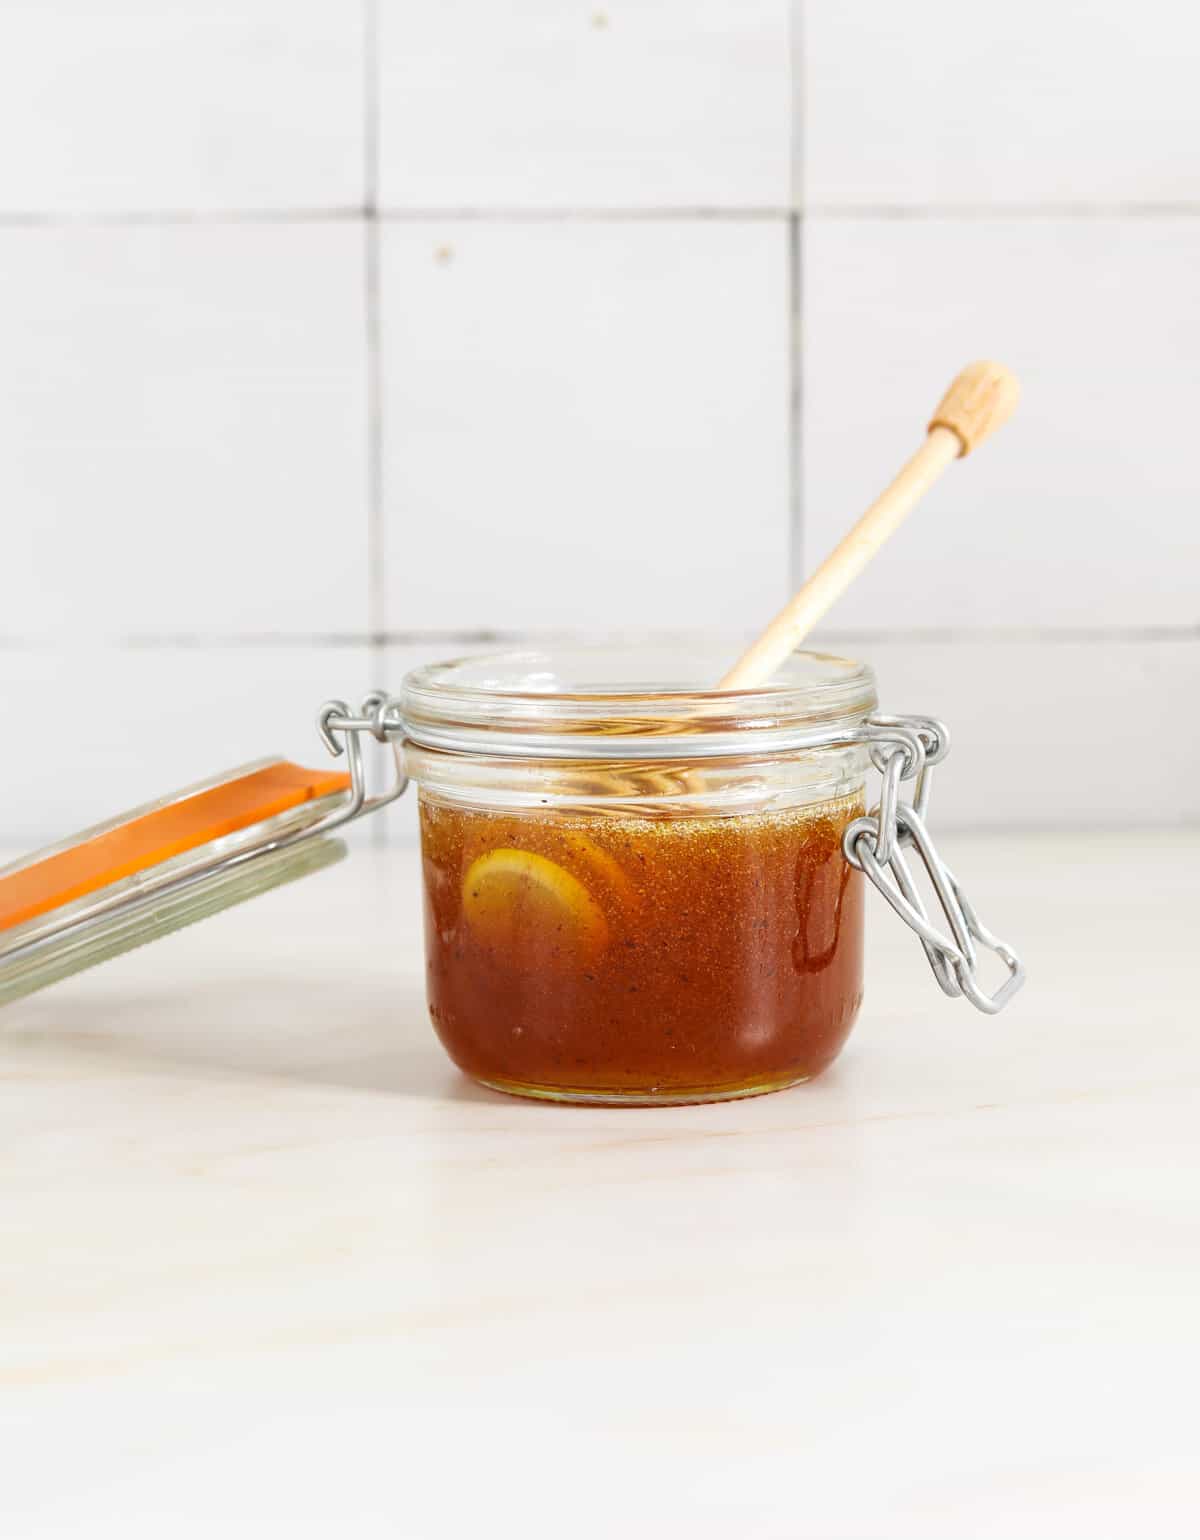 A small glass jar filled with honey and a wooden honey dipper hanging out the side.